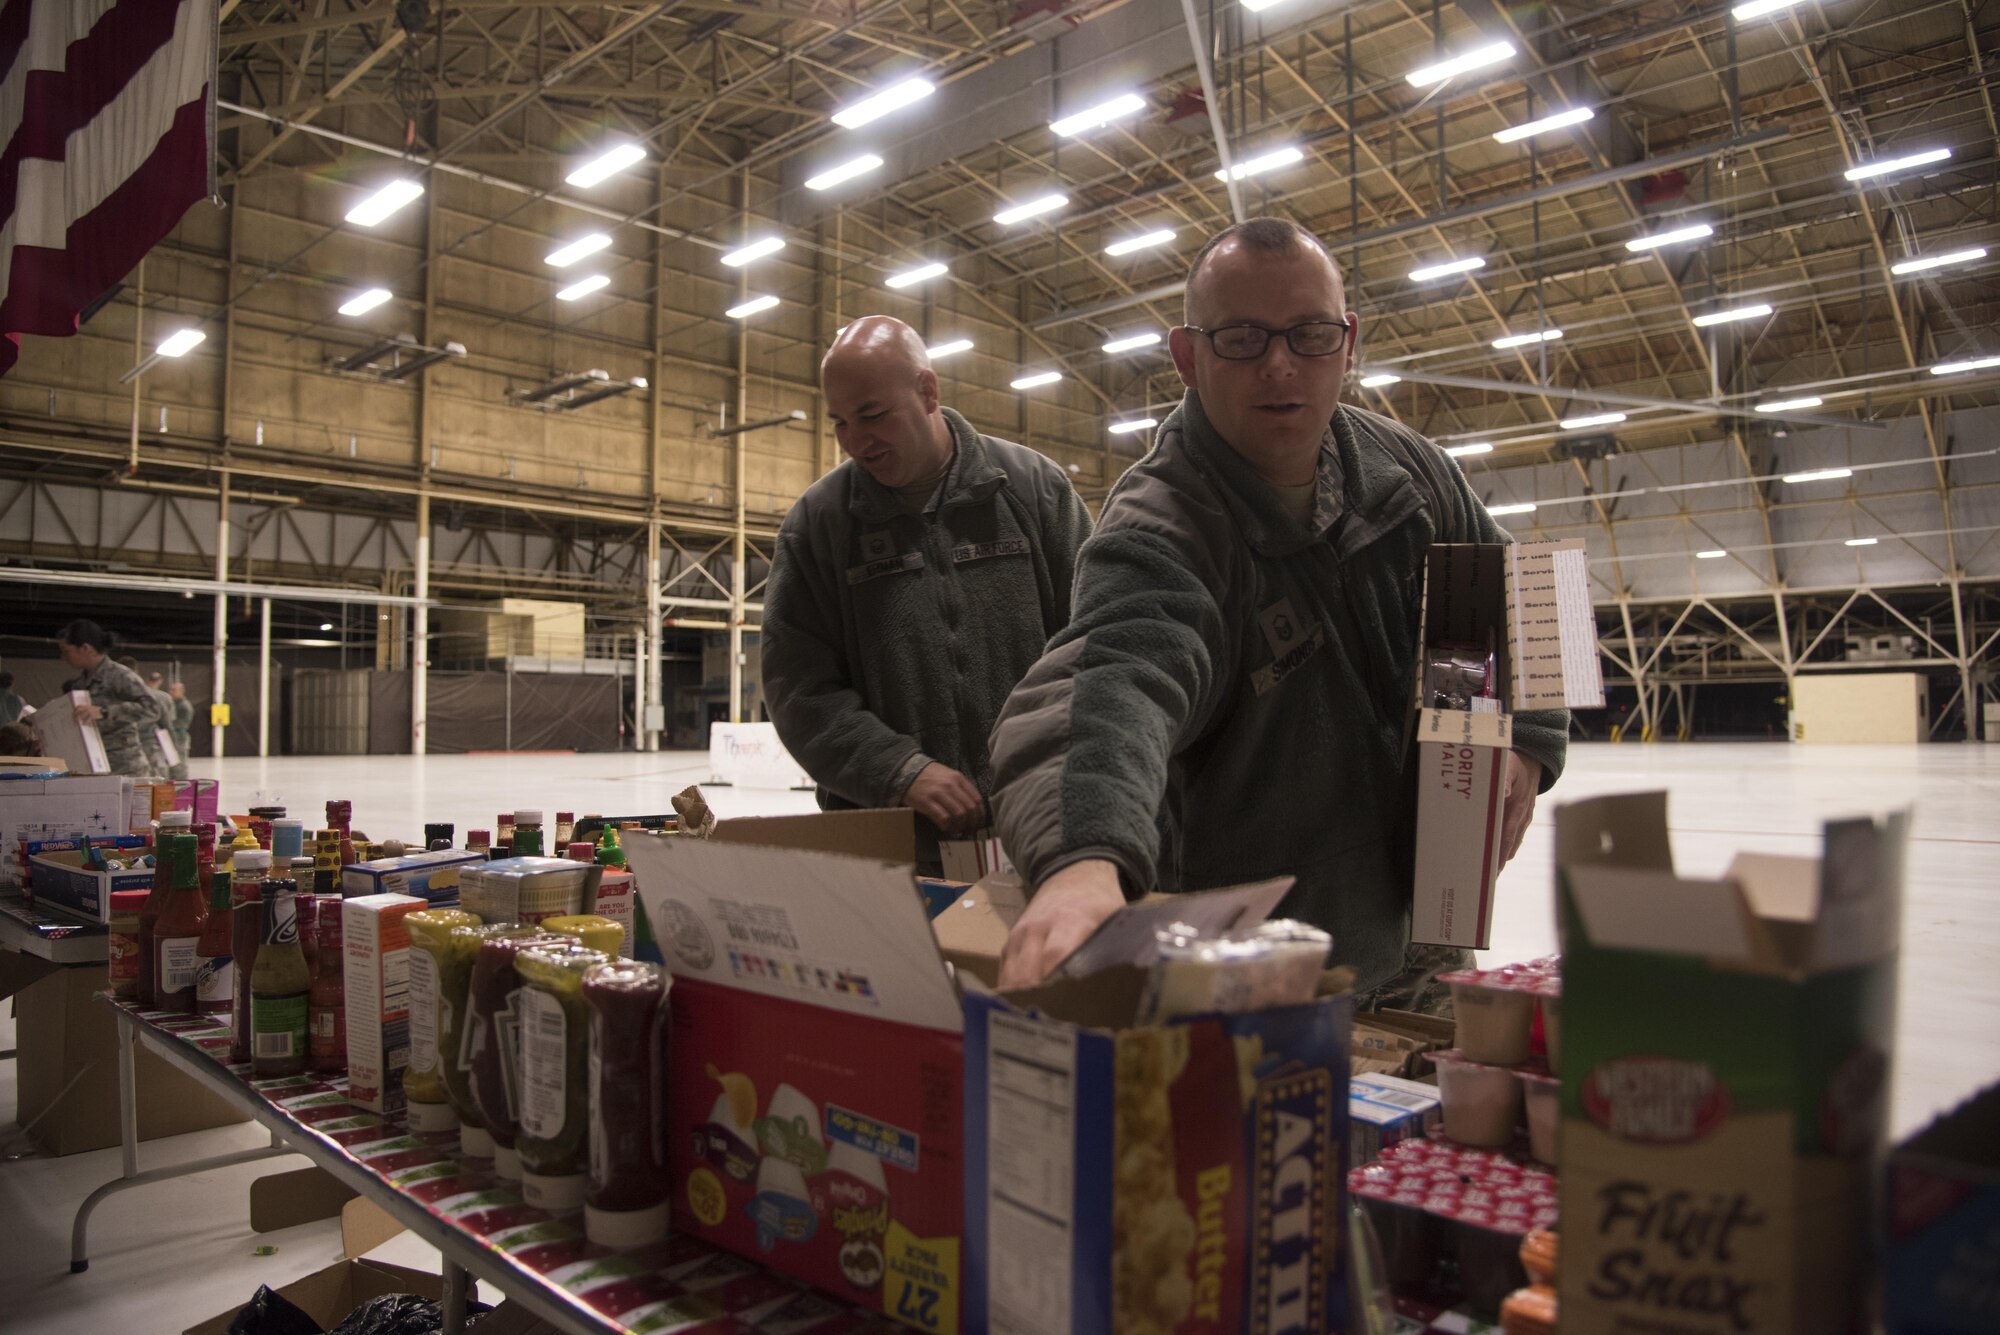 Master Sgt. Nicholas Ehman (left), 92nd Maintenance Squadron accessories flight assistant flight chief, and Master Sgt. Mark Simonds (right), Airman Family and Readiness Center superintendent, pack shipping boxes Dec. 1, 2016 at Fairchild Air Force Base. Ehman and Simonds were part of a team that consisted of more than 20 volunteers who packaged more than 400 shipping boxes. The care packages will be delivered to deployed military members as part of the KREM 2 News Treats 2 Troops program. (U.S. Air Force photo/Senior Airman Nick J. Daniello)